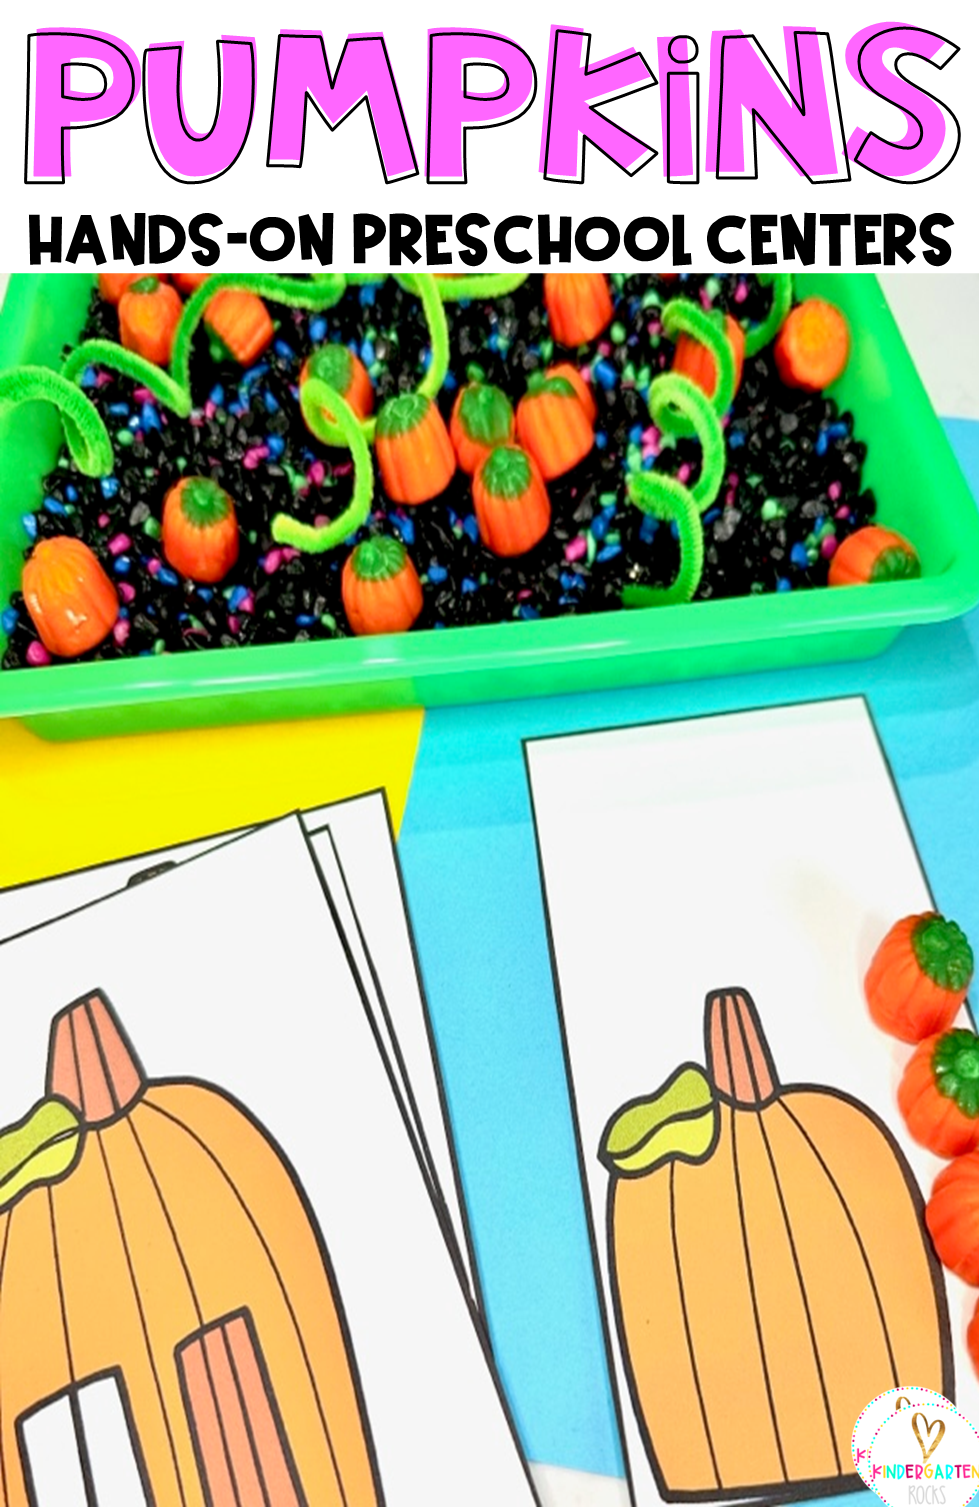 Are you looking for fun fall themed pumpkin math and literacy centers or morning bin activities that you can prep quickly for your preschool classroom? Then you will love Pumpkin Centers and Activities for Preschool.